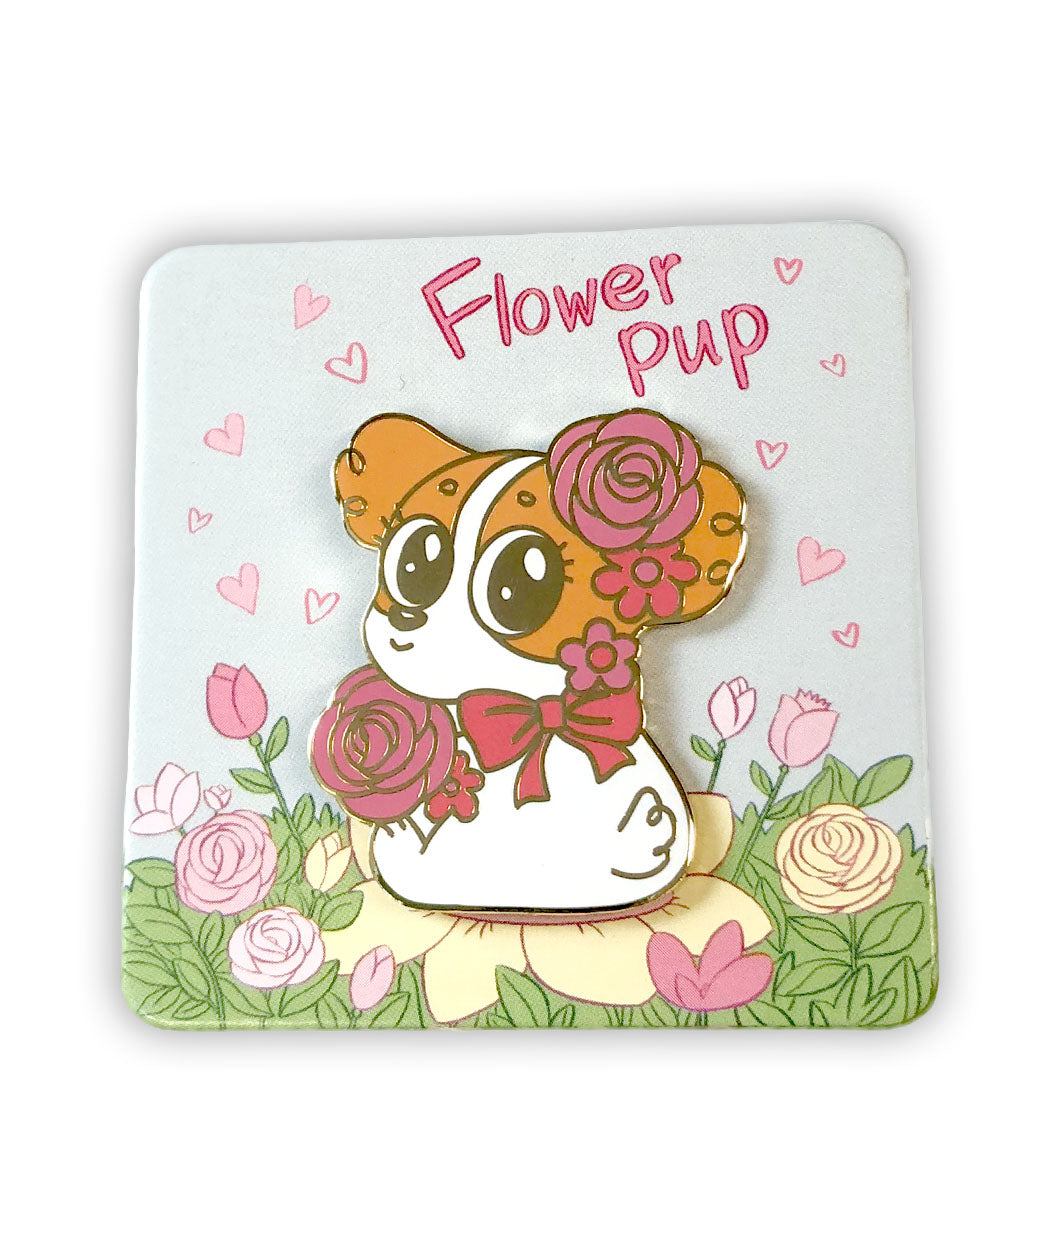 Enamel pin of an orange and white puppy sitting on the ground, looking over its should. The puppy has pink flowers around its head, and it wears a pink bow. The pin is on a square backing card that depicts a field of flowers, with the text 